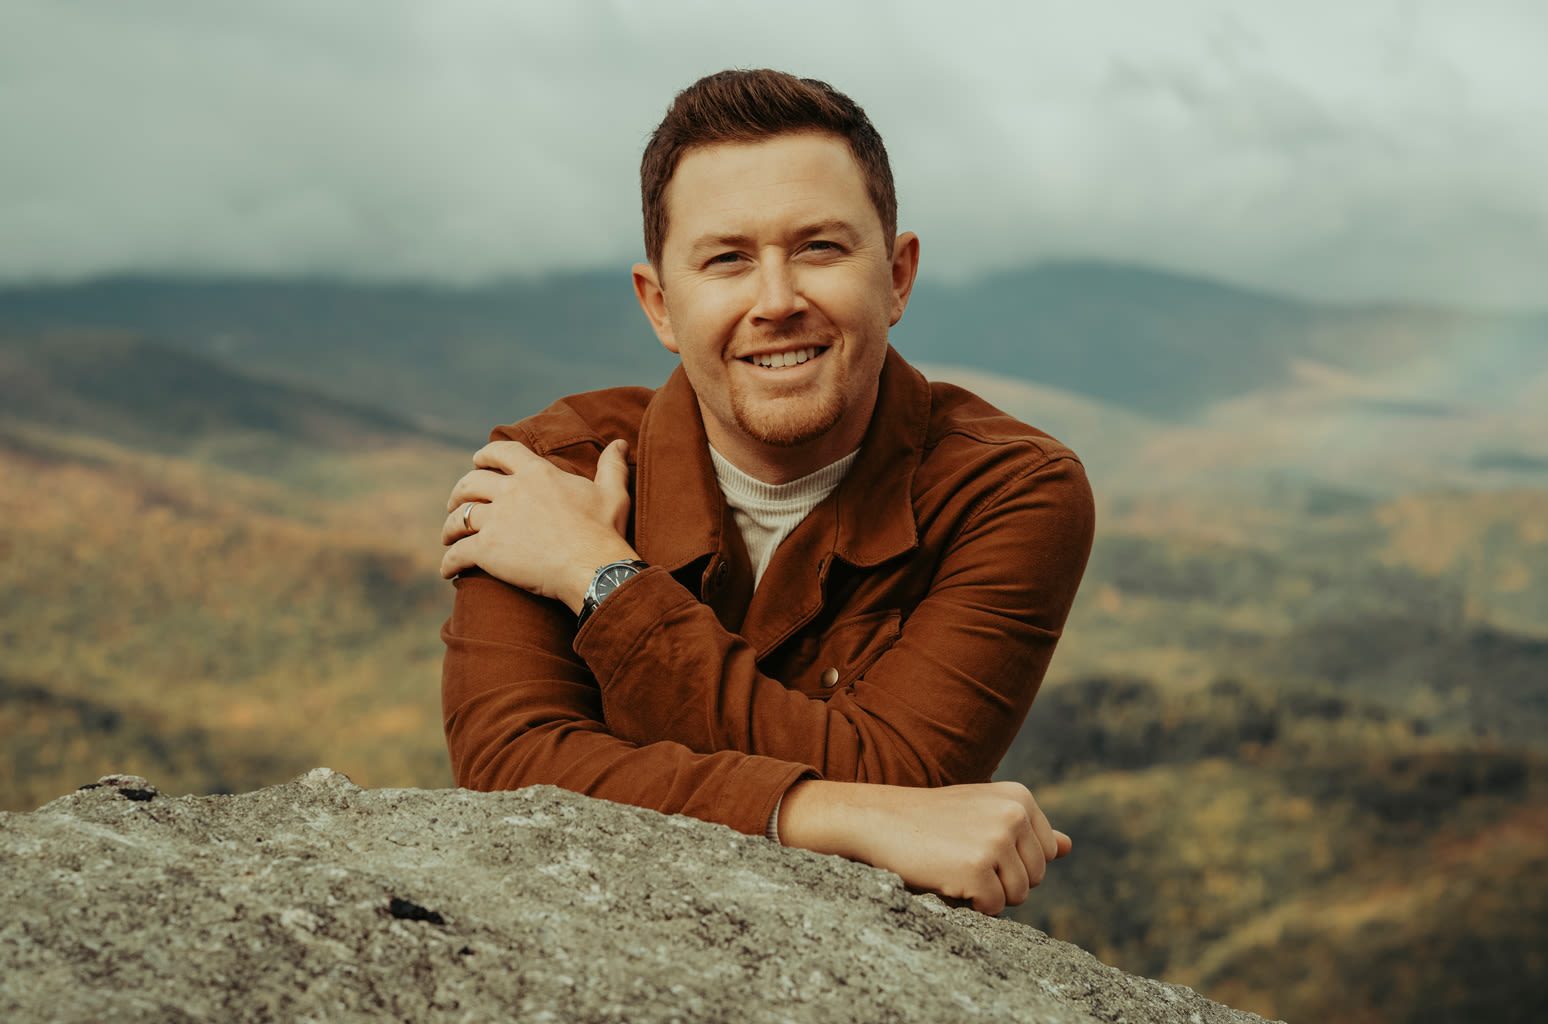 Scotty McCreery Doubles Down on Songwriting, Storytelling on ‘Rise and Fall’: ‘We Wanted to Make Country Music’